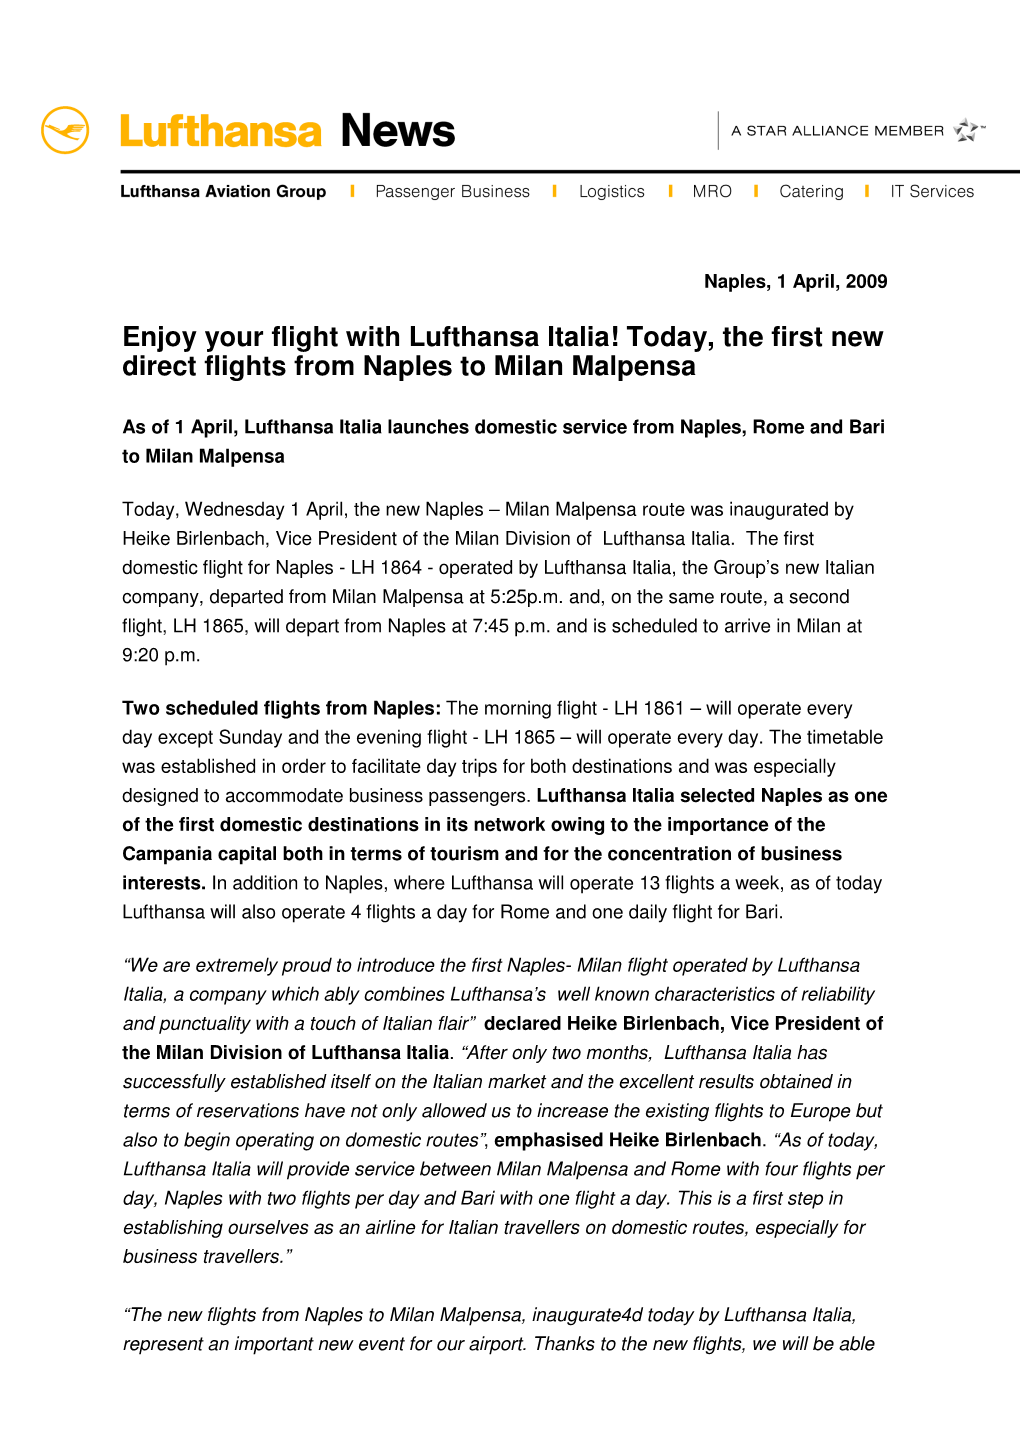 Enjoy Your Flight with Lufthansa Italia! Today, the First New Direct Flights from Naples to Milan Malpensa